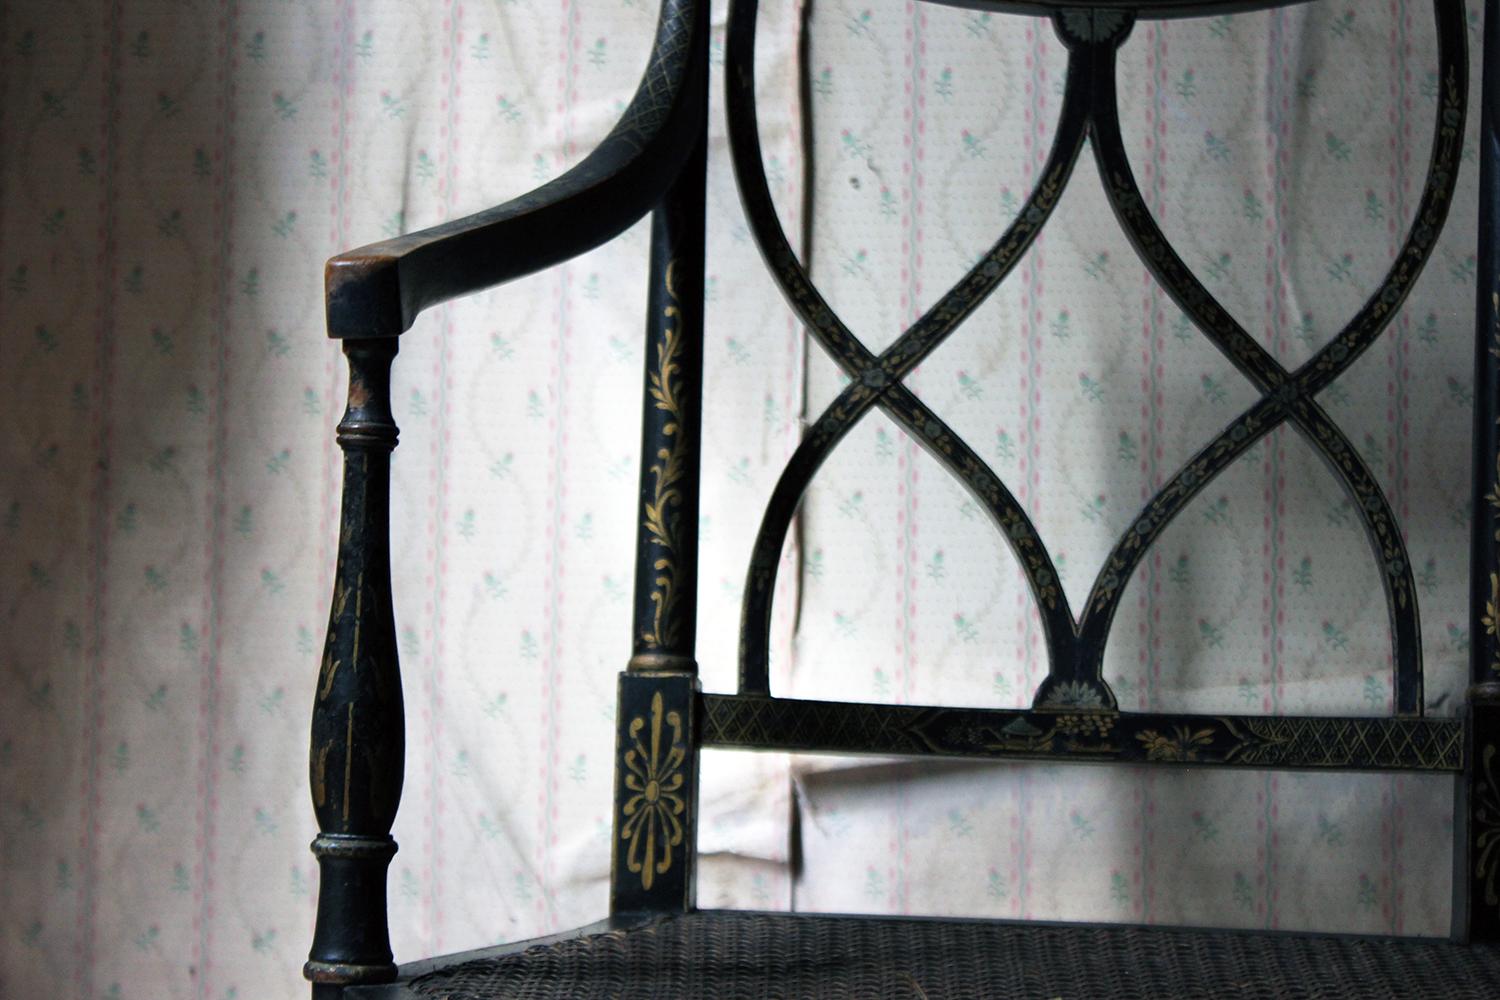 The early 20th century japanned lacquered beech elbow chair, in the Regency taste with chinoiserie style decoration, and with a Sheraton style latticed back, on baluster and fluted turned front legs, the whole by Druce and Co., Ltd. of Baker Street,